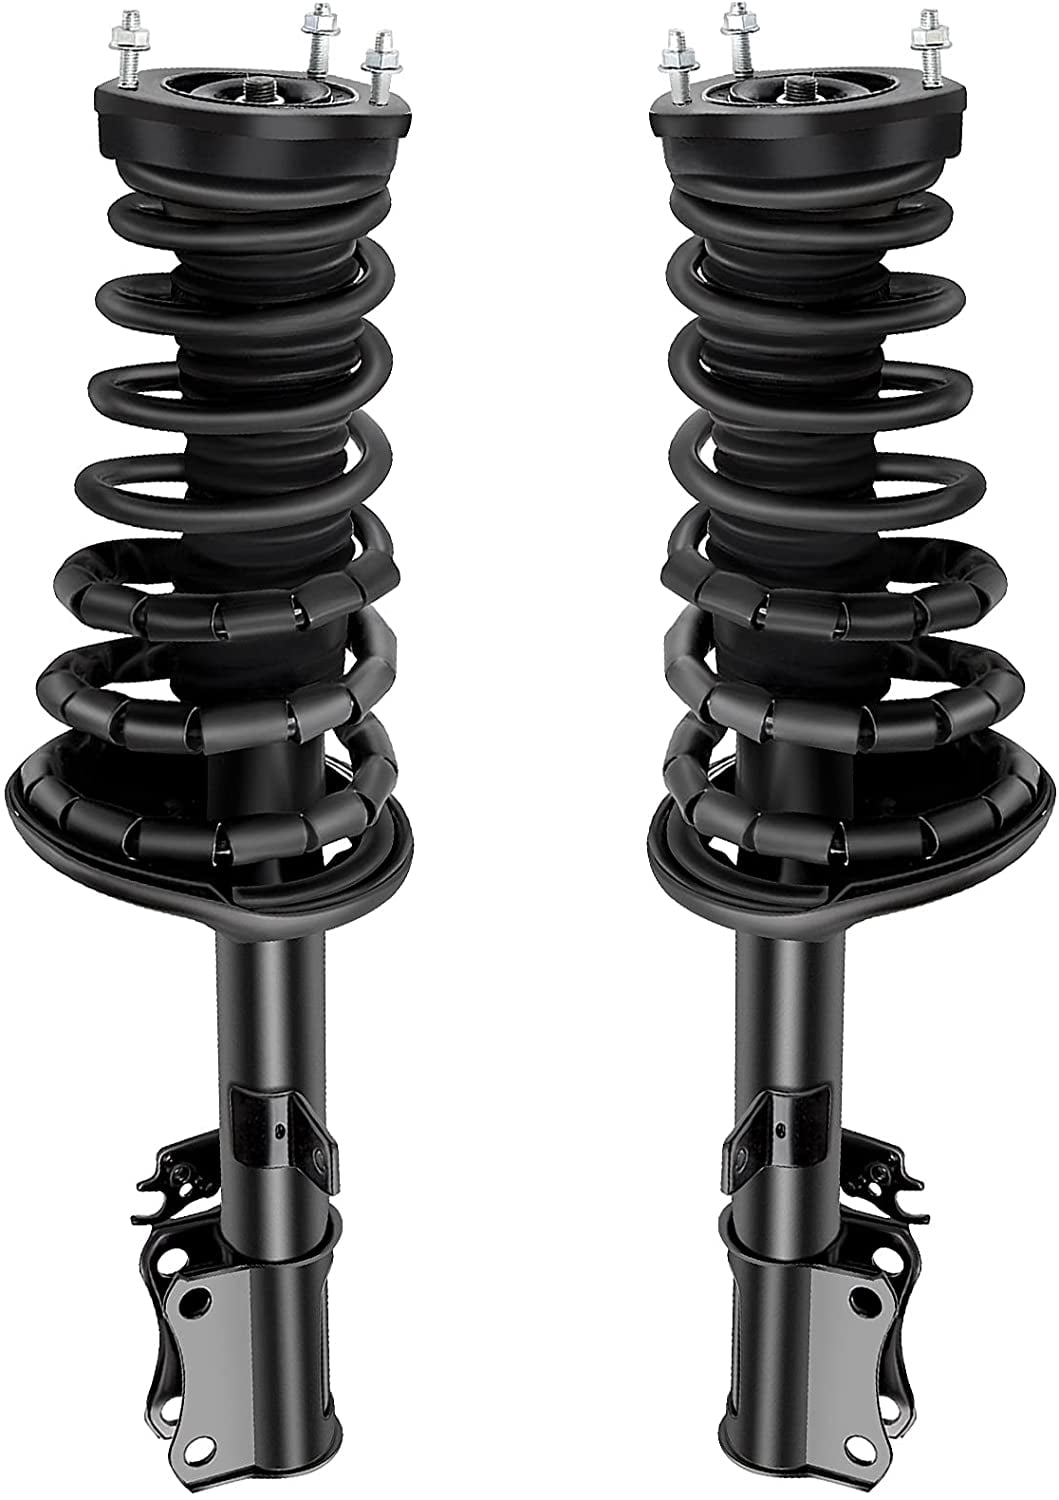 CCIYU Rear Complete Struts Shock Absorbers Fit for 1992-2001 for Lexus  ES300,1997-2003 for Toyota Avalon,1992-1994 1997-2001 for Toyota Camry  271681